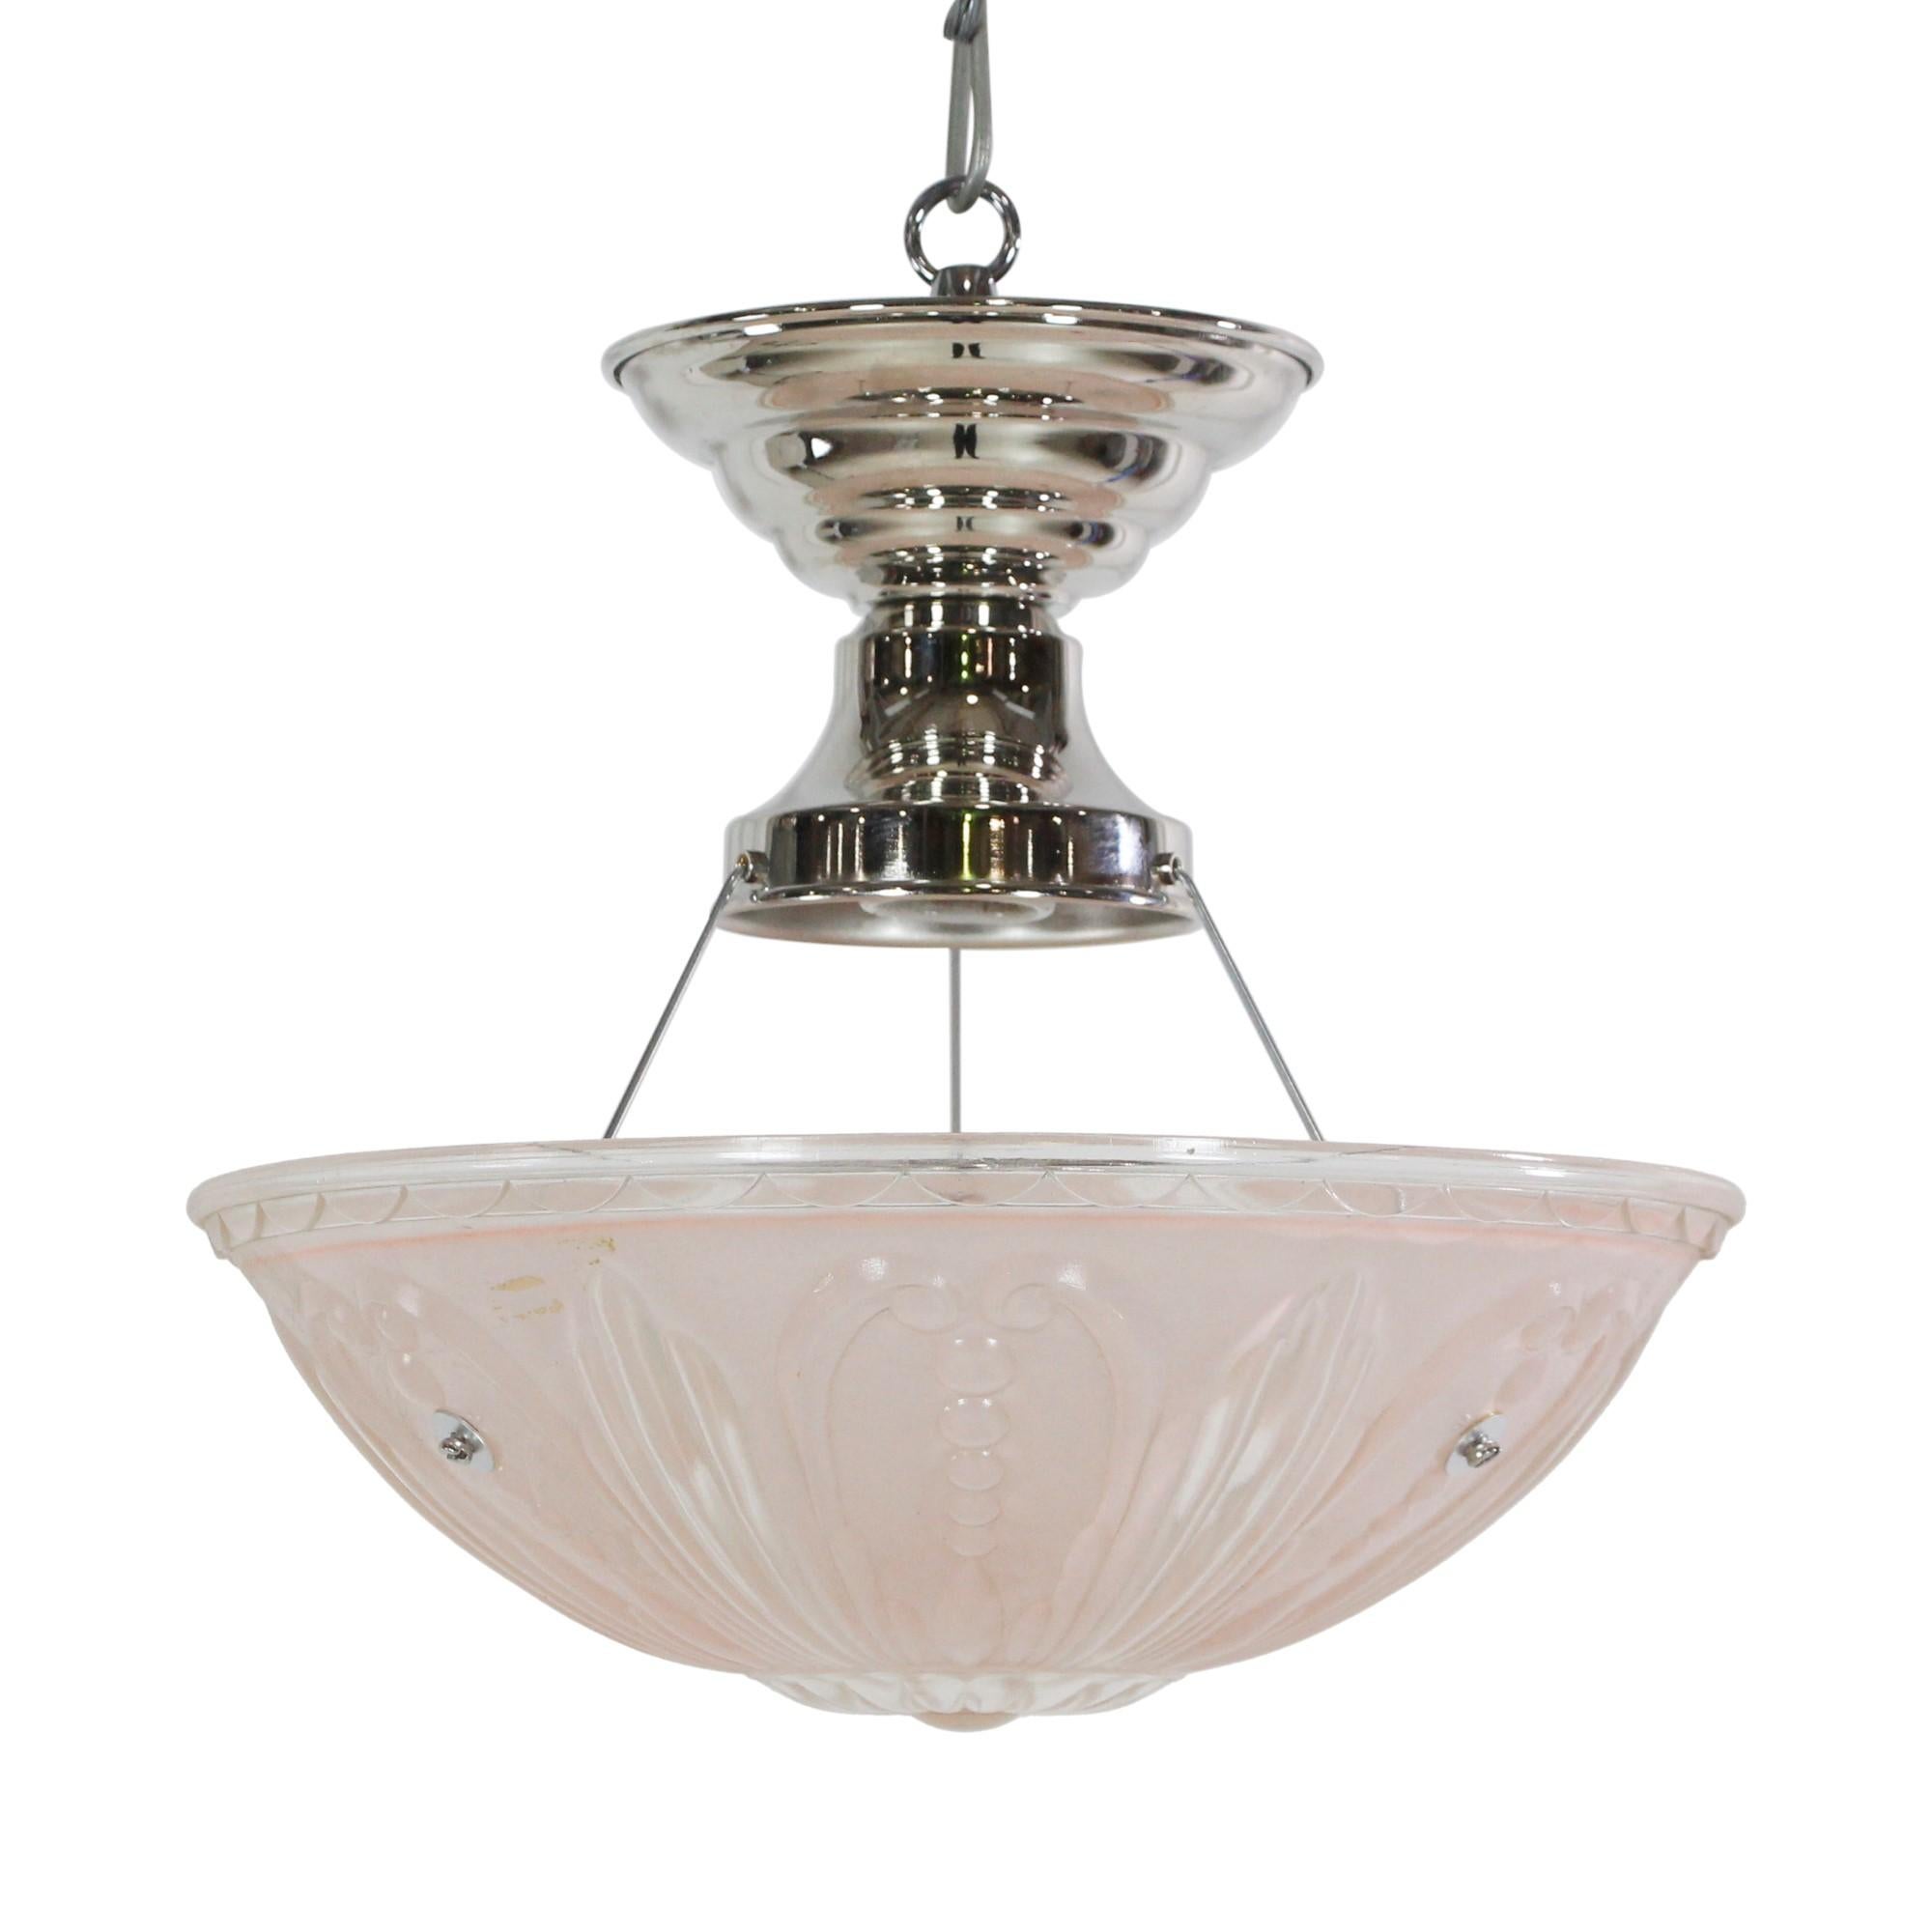 Mid 20th century pink and clear cast glass shade light mounted on a newly wired nickel finish pendant light fixture. This can be seen at our 400 Gilligan St location in Scranton, PA.